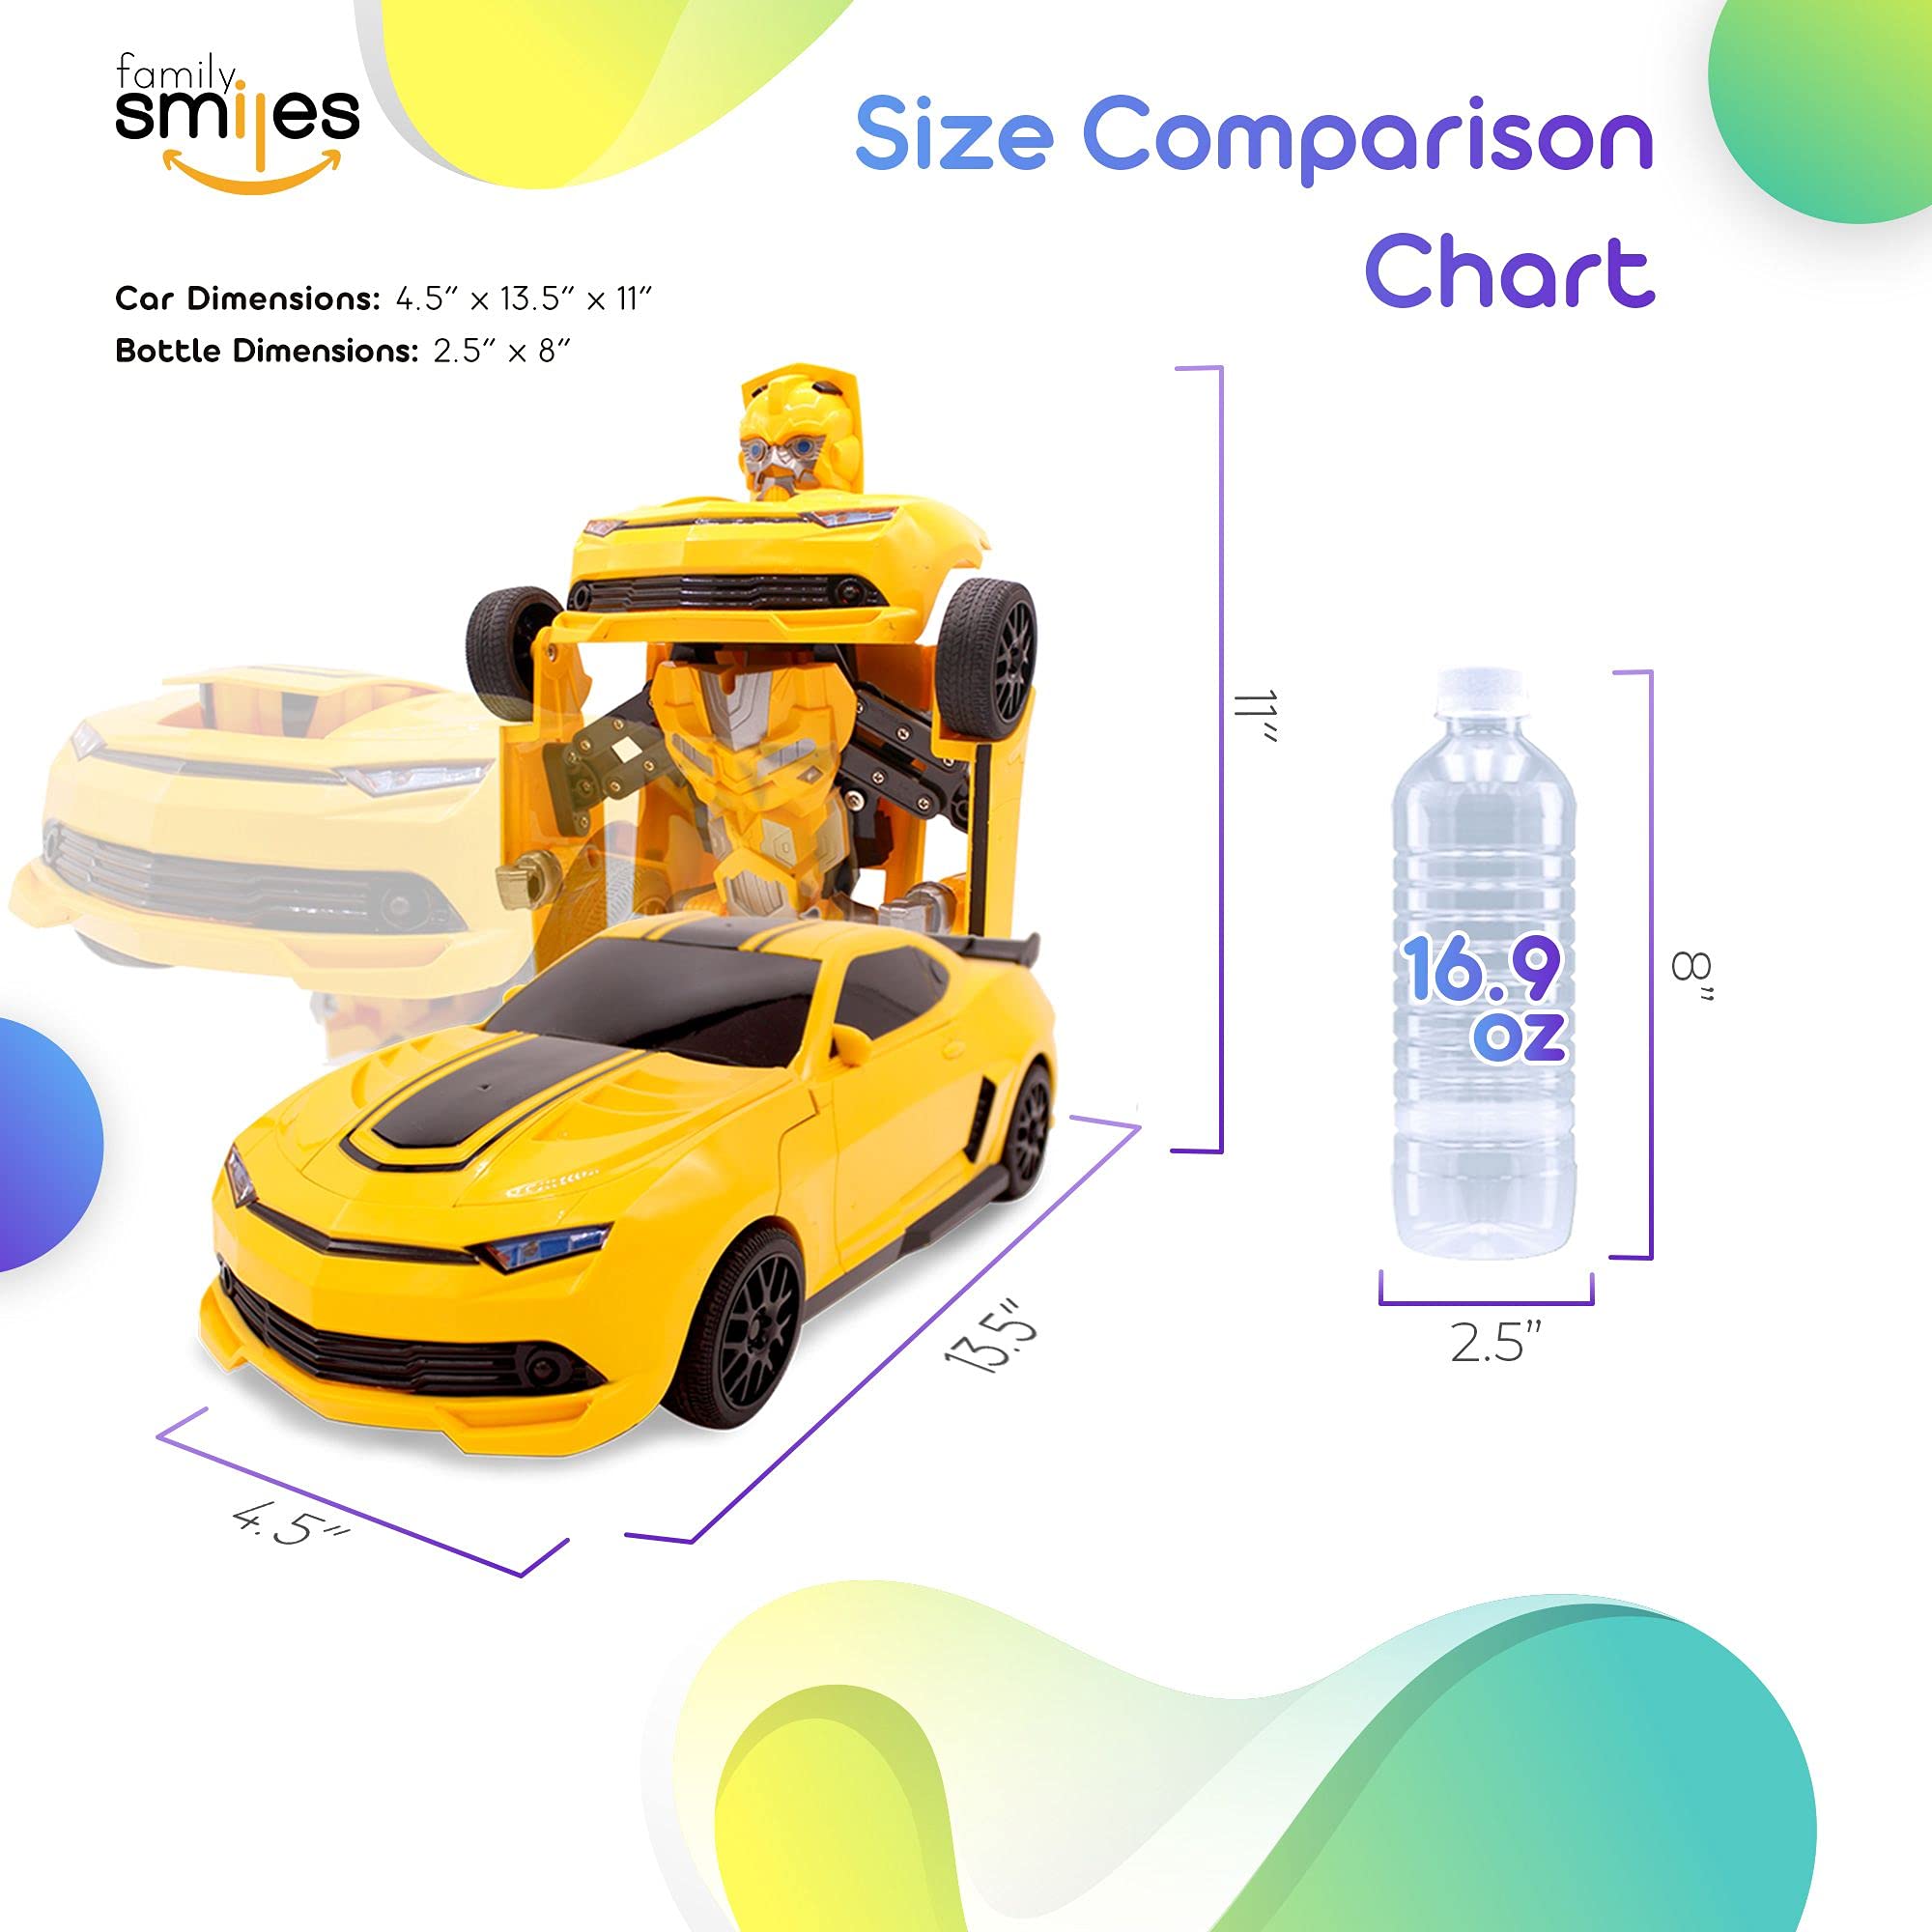 Kids RC Toy Sports Car Transforming Robot Remote Control with One Button Transformation, Realistic Engine Sounds, 360 Speed Drifting, Sword and Shield Included Toys For Boys 1:14 Scale Yellow